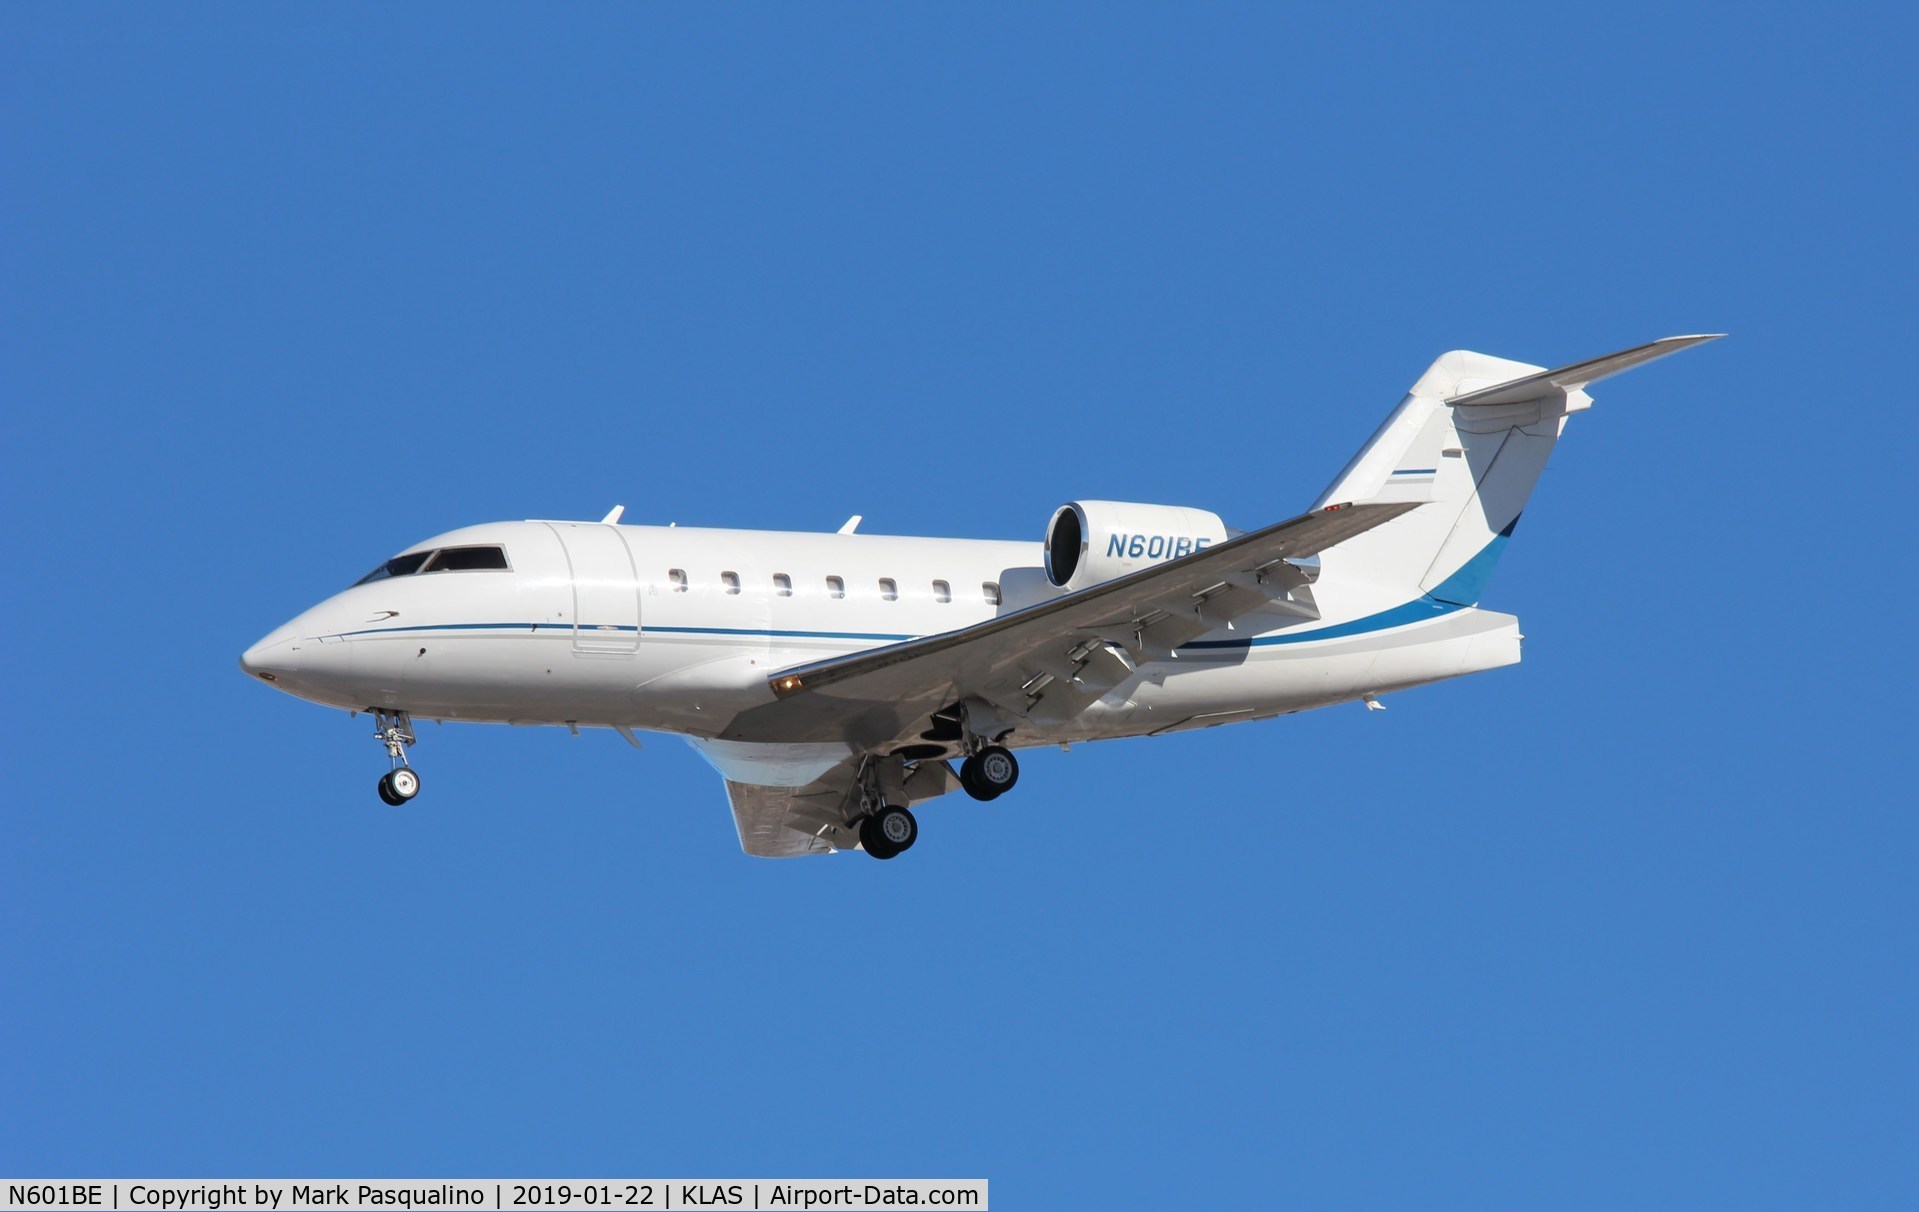 N601BE, 1991 Canadair Challenger 601-3A (CL-600-2B16) C/N 5103, Challenger 601-3A